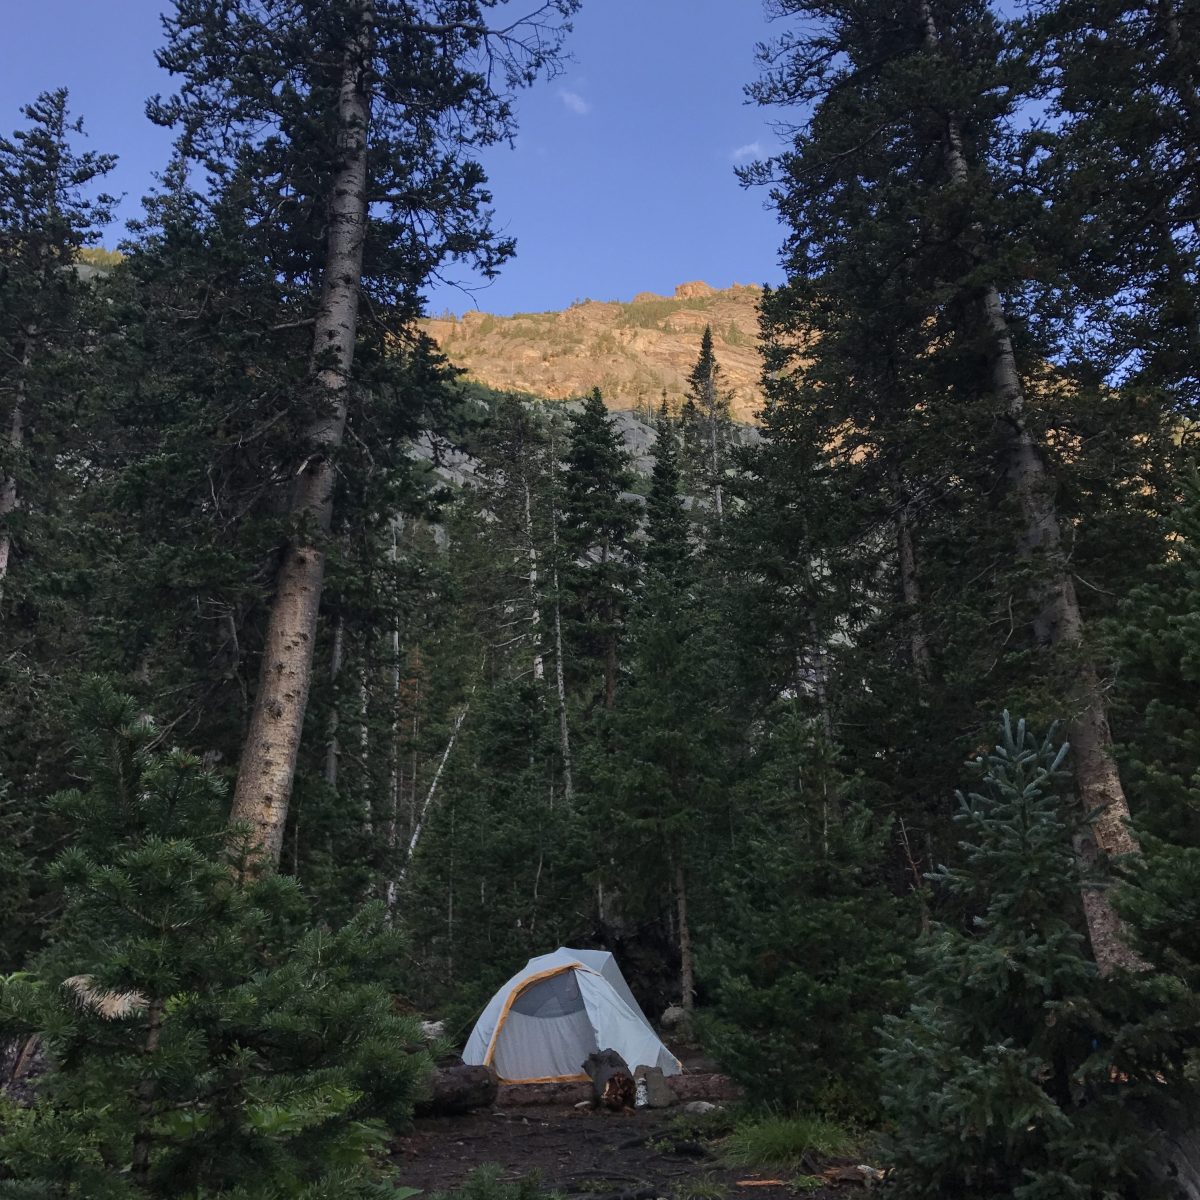 Camping 101: What Do I Need?